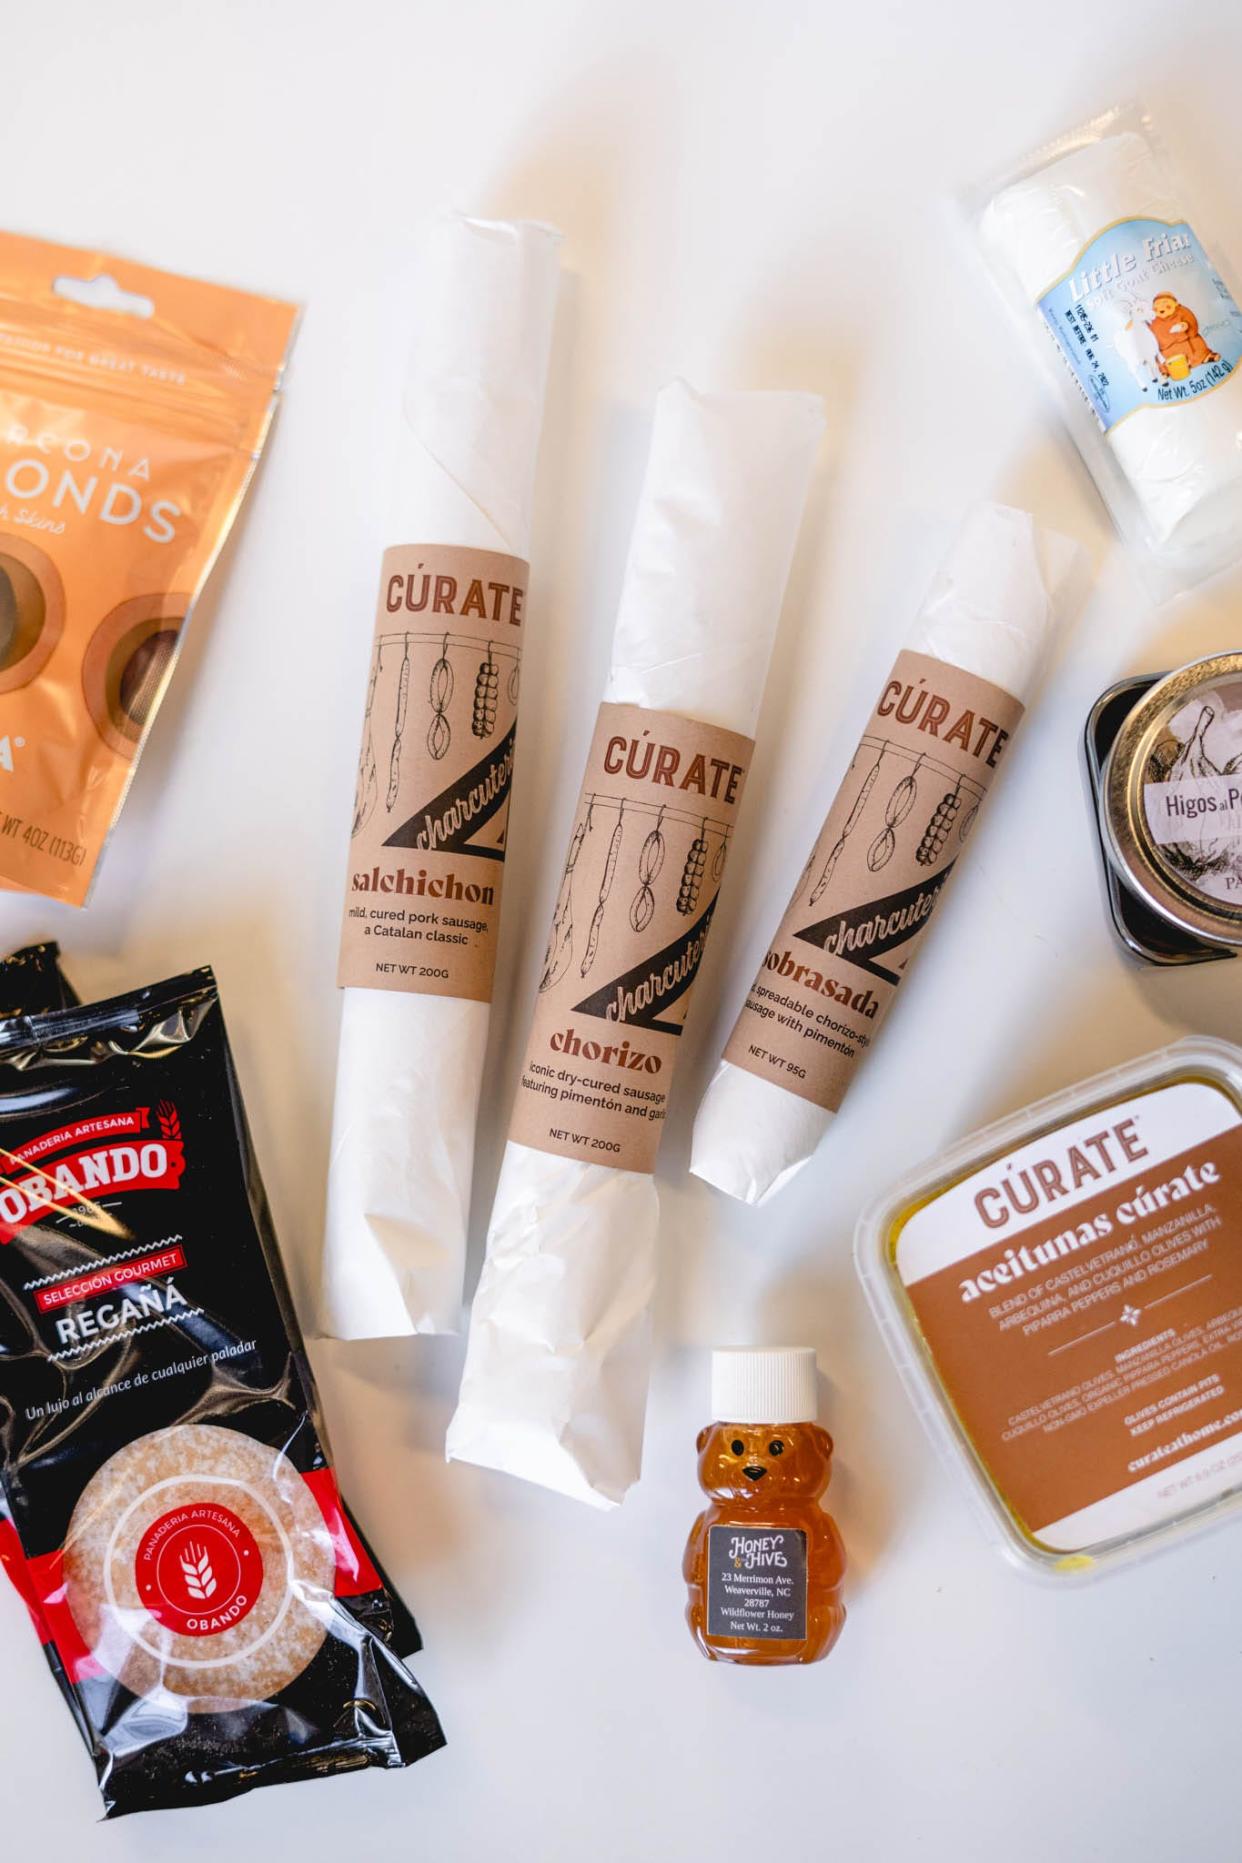 Cúrate's Charcuterie Tasting Experience is a kit full of the award-winning restaurant's products.